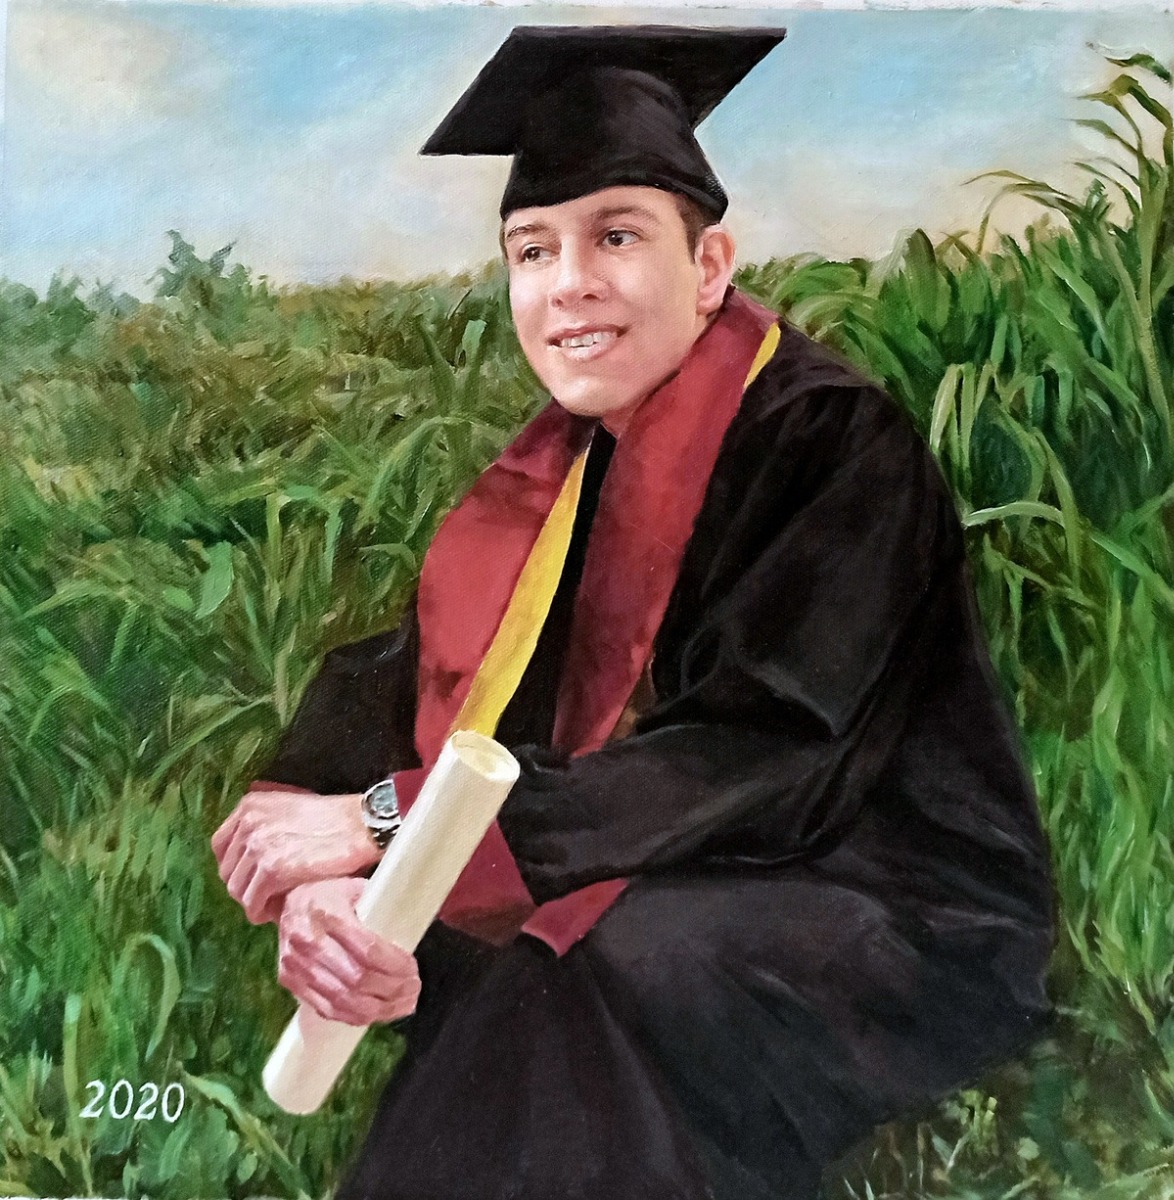 A high school graduation portrait painting capturing a graduate sitting in the grass, rendered in an oil thick style.